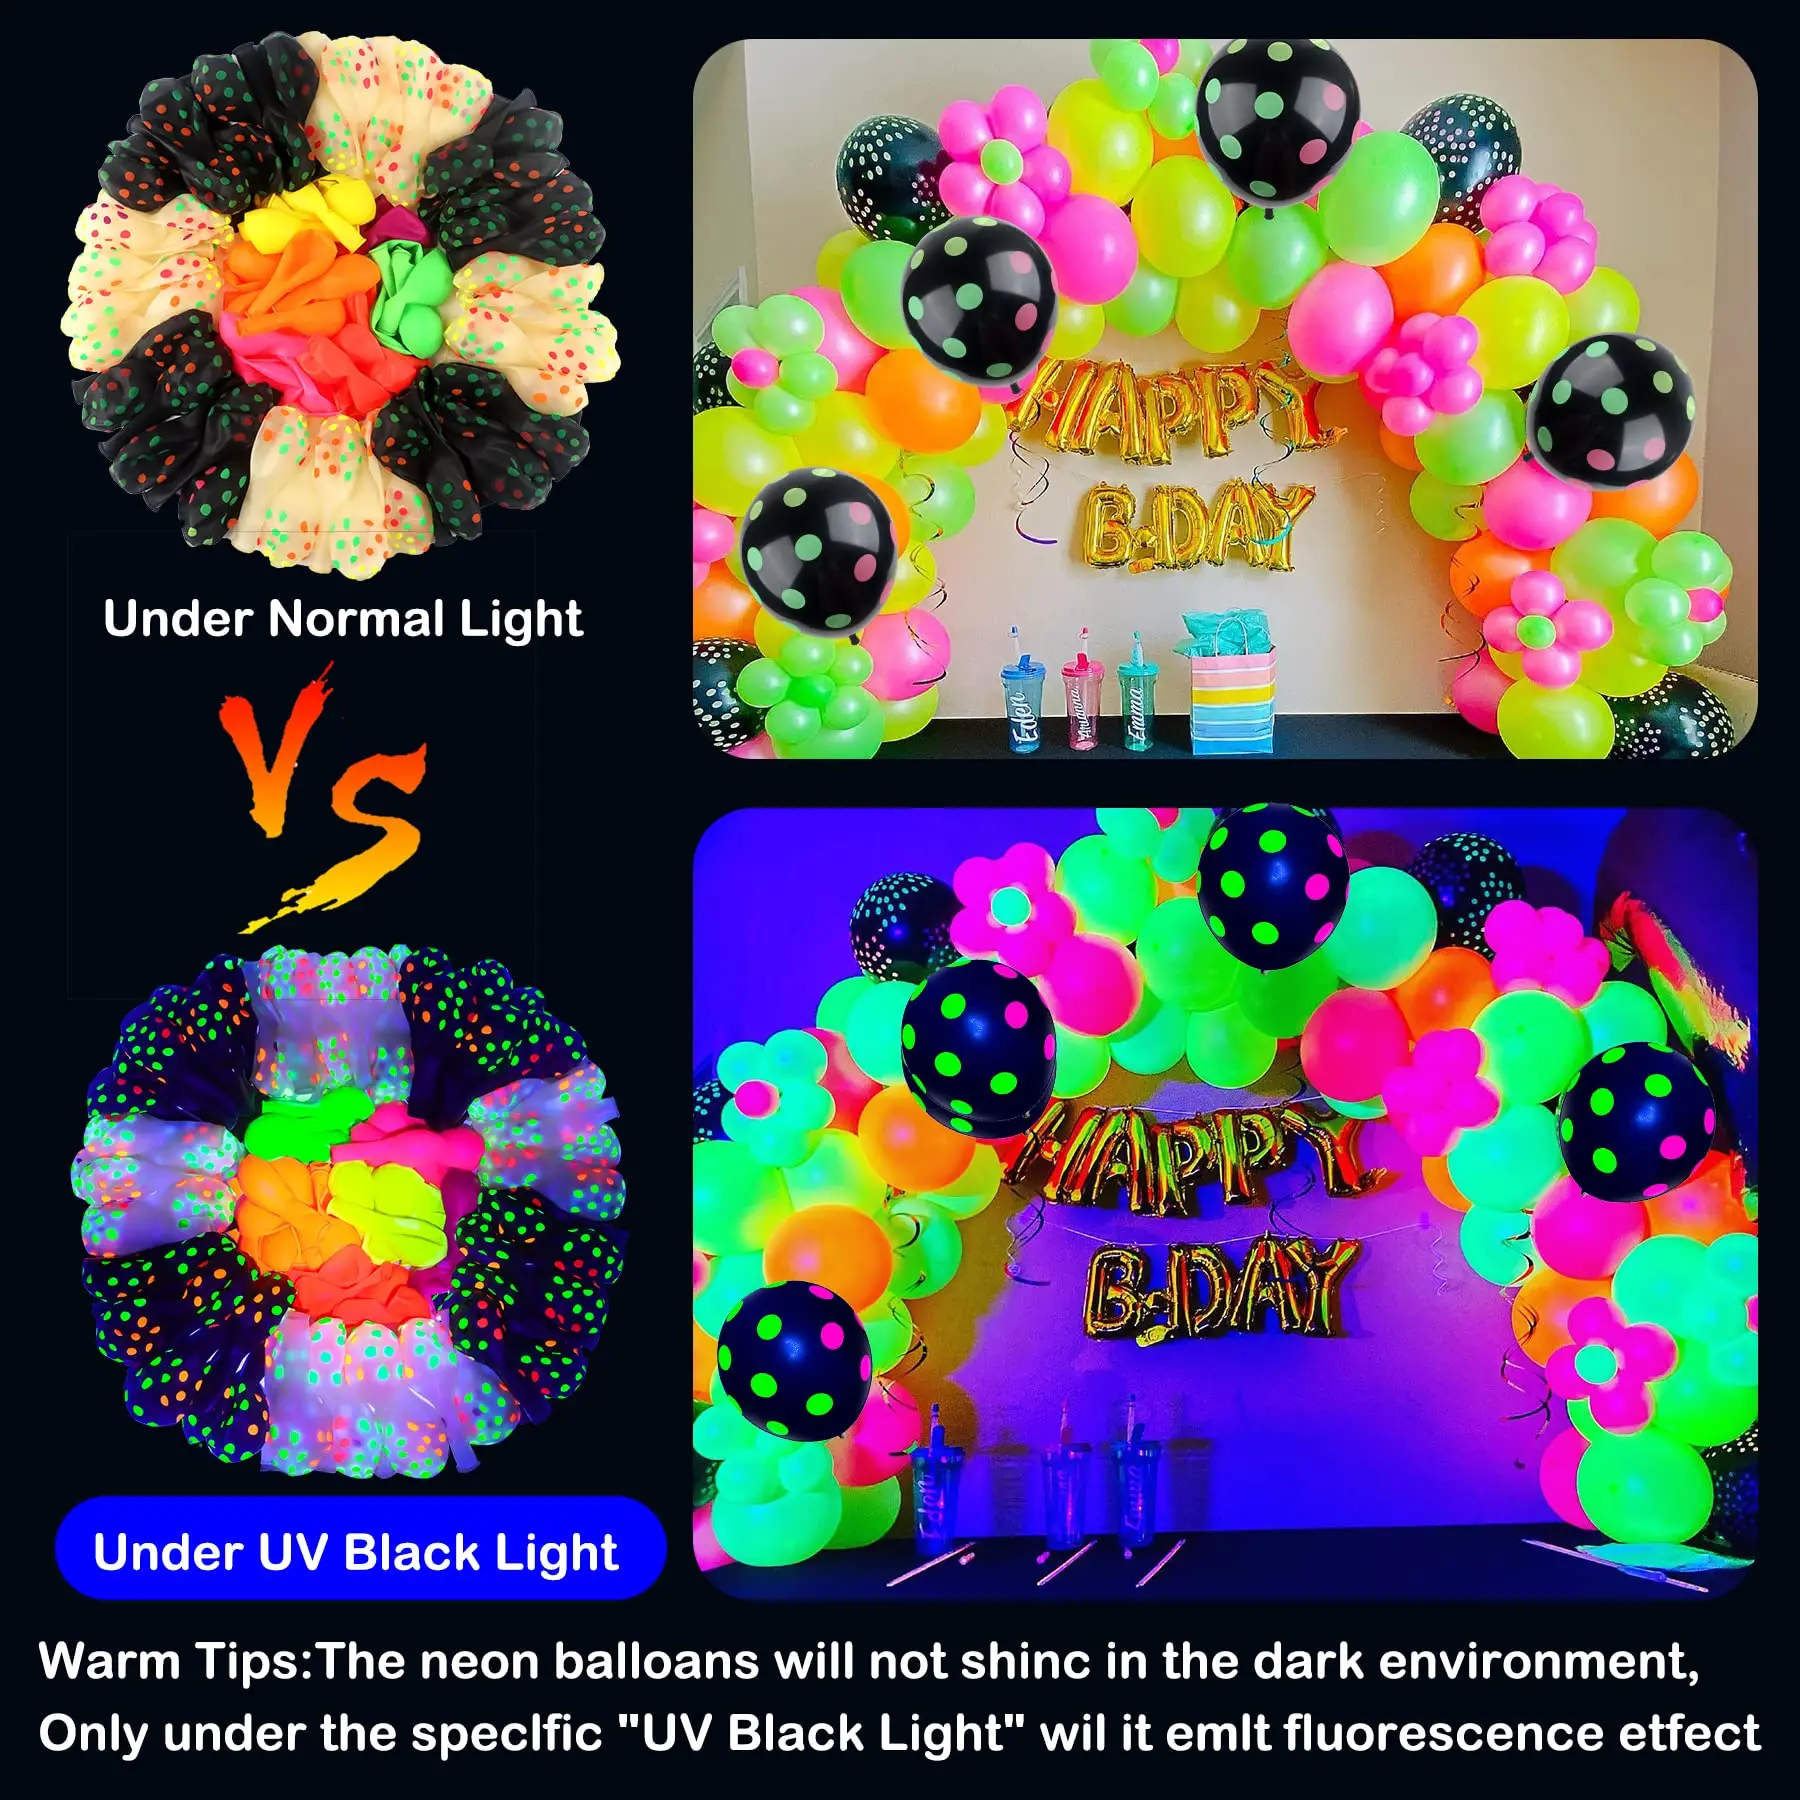 100 Pcs UV Reaction Neon Balloons Decoration 12inch Polka Dot Blacklight Balloons Glow in the Dark 3 Colors Fluorescent Balloon images - 6